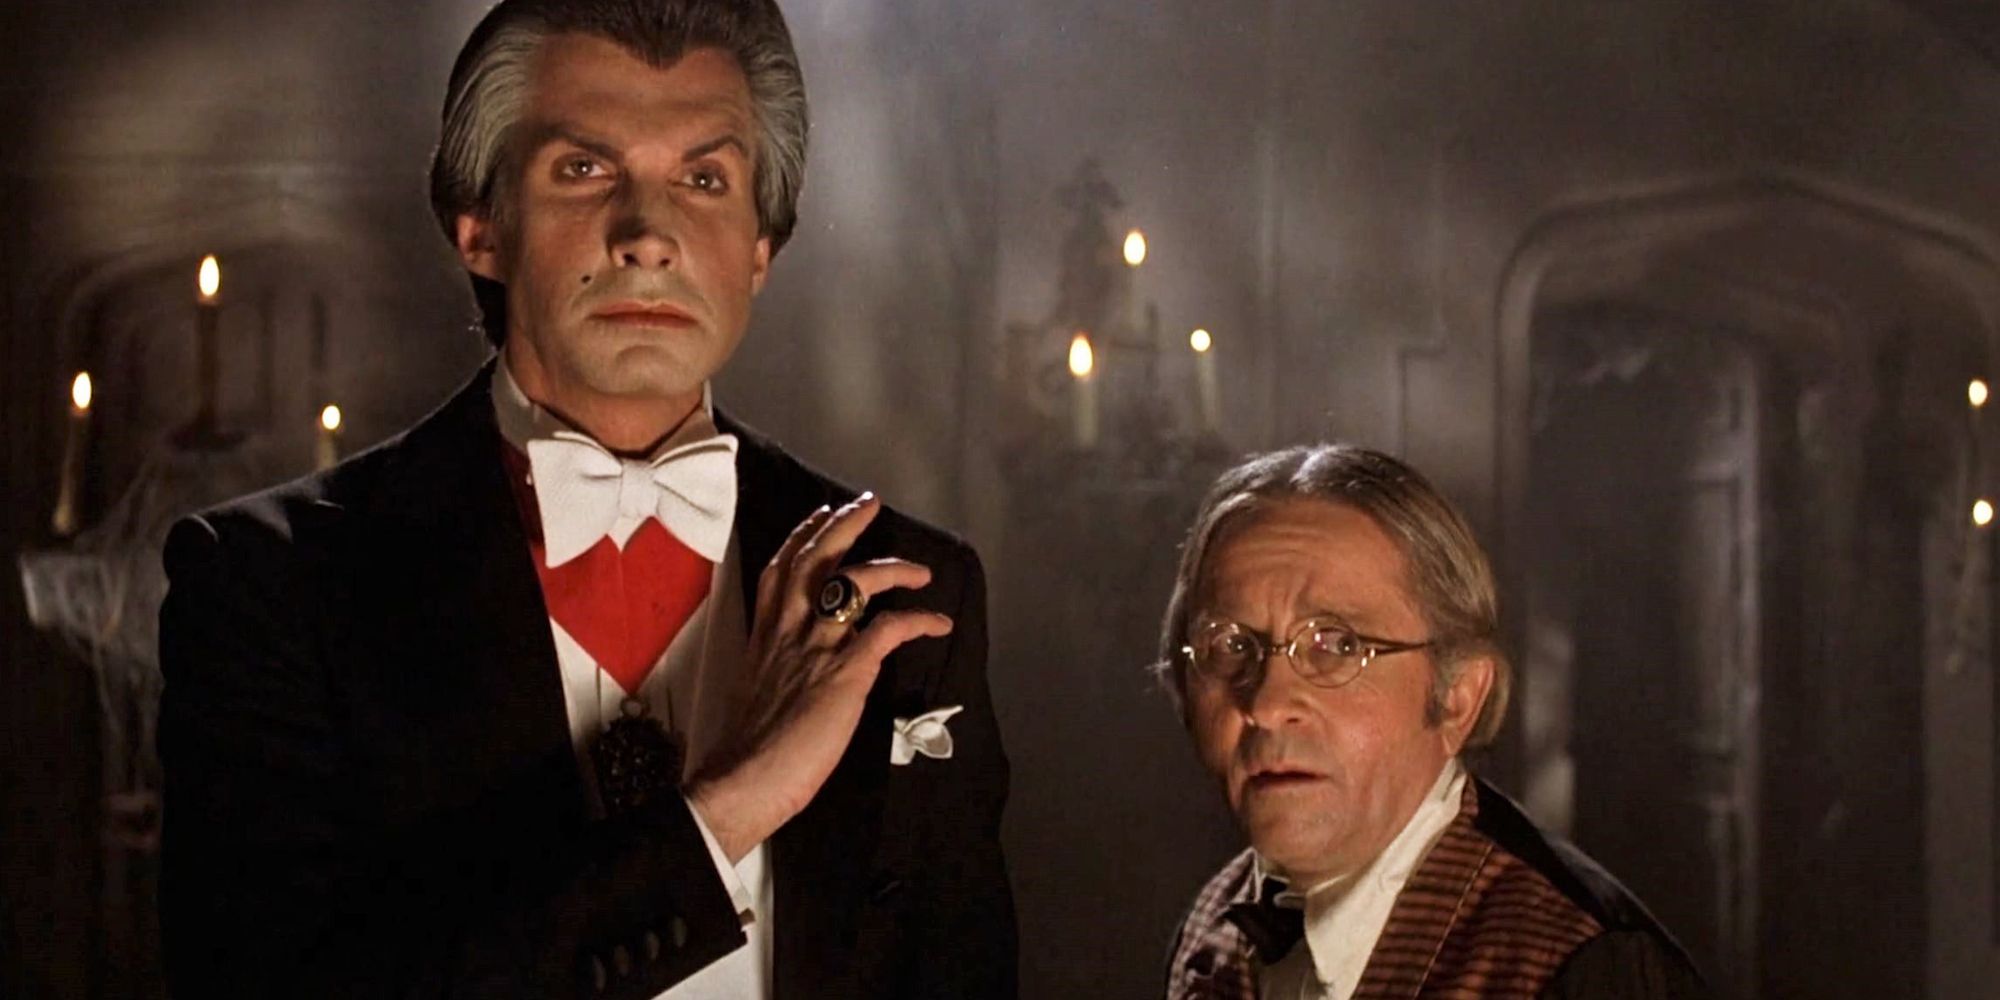 George Hamilton as Count Dracula standing next to Arte Johnson as Renfield in Love at First Bite